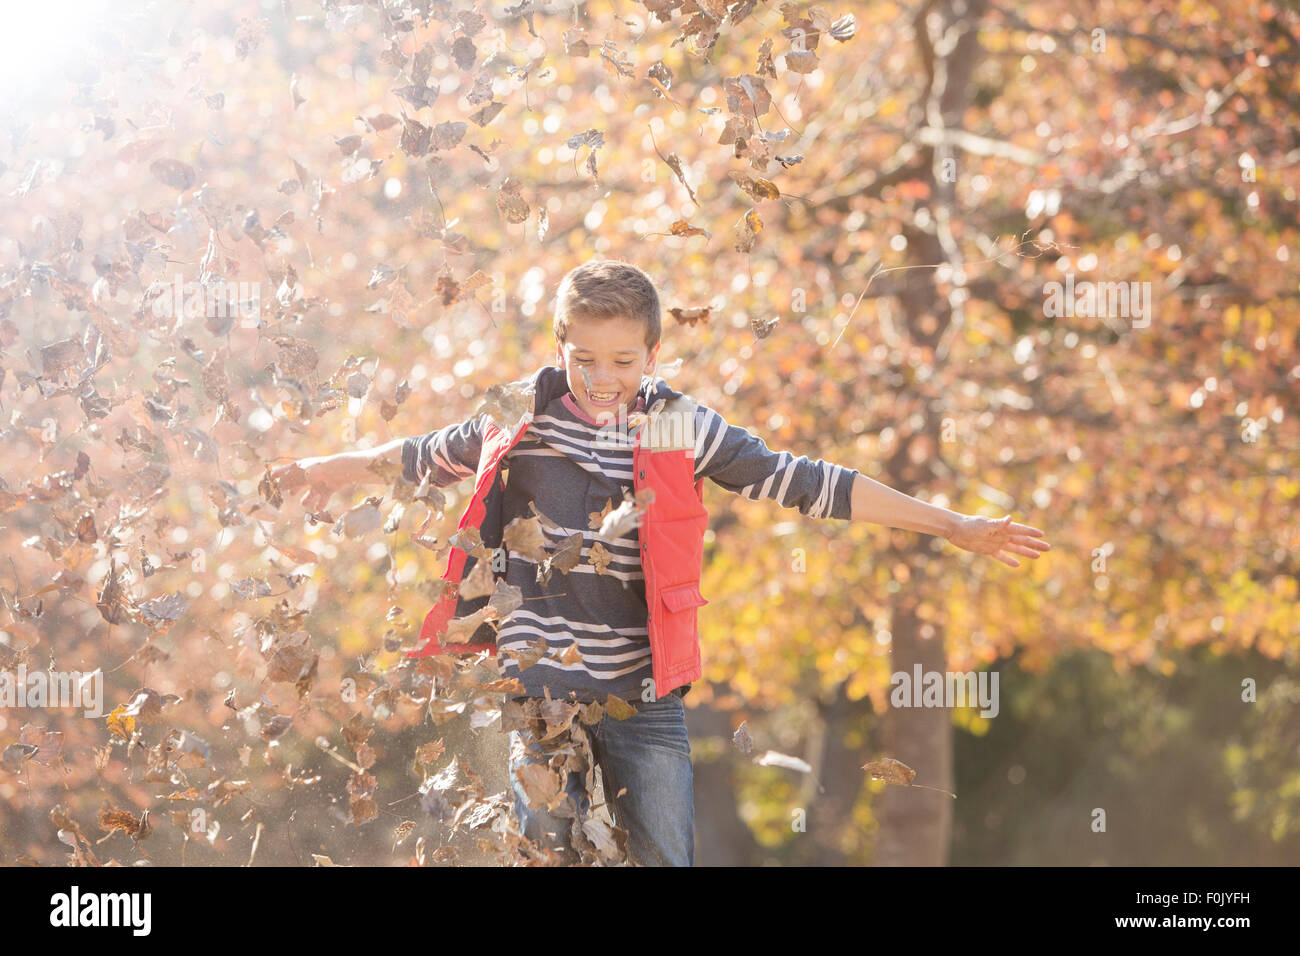 Playful boy playing in autumn leaves Stock Photo